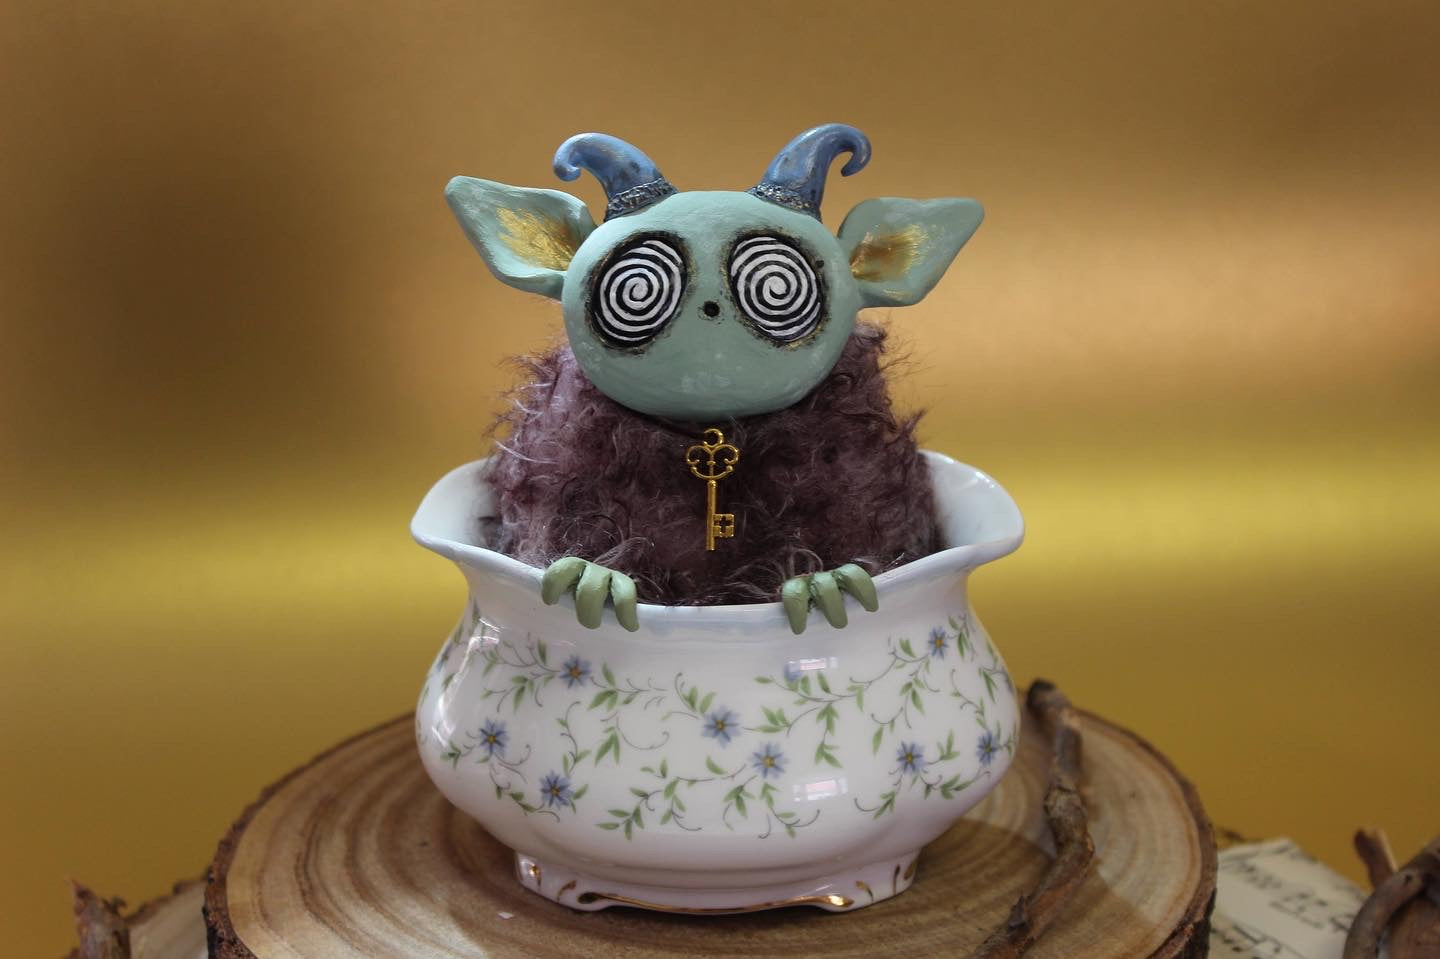 Agnes the Teacup Critter